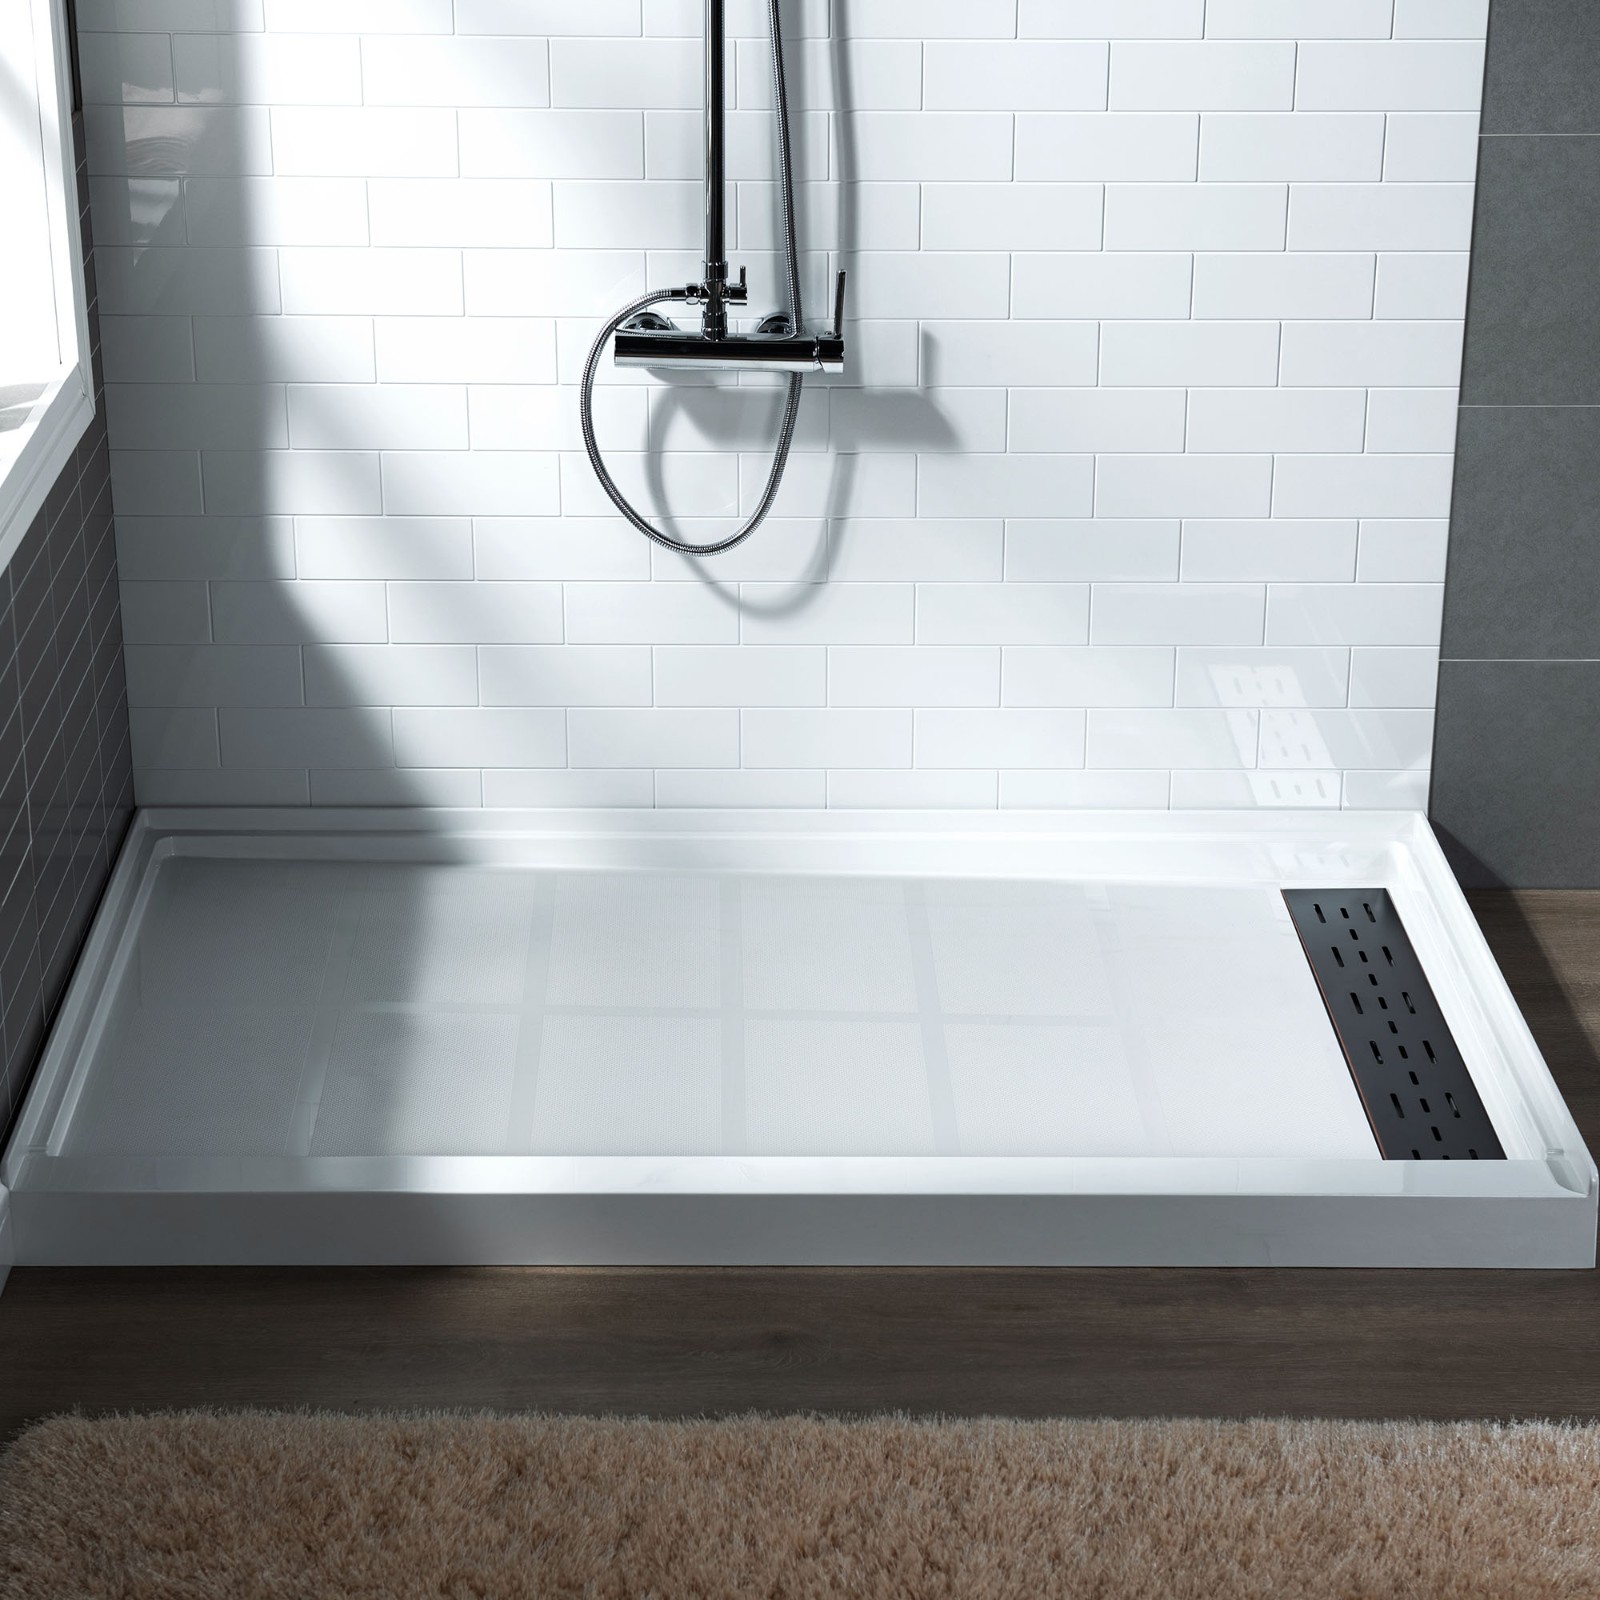  WOODBRIDGE SBR4836-1000R-ORB SolidSurface Shower Base with Recessed Trench Side Including Oil Rubbed Bronze Linear Cover, 48